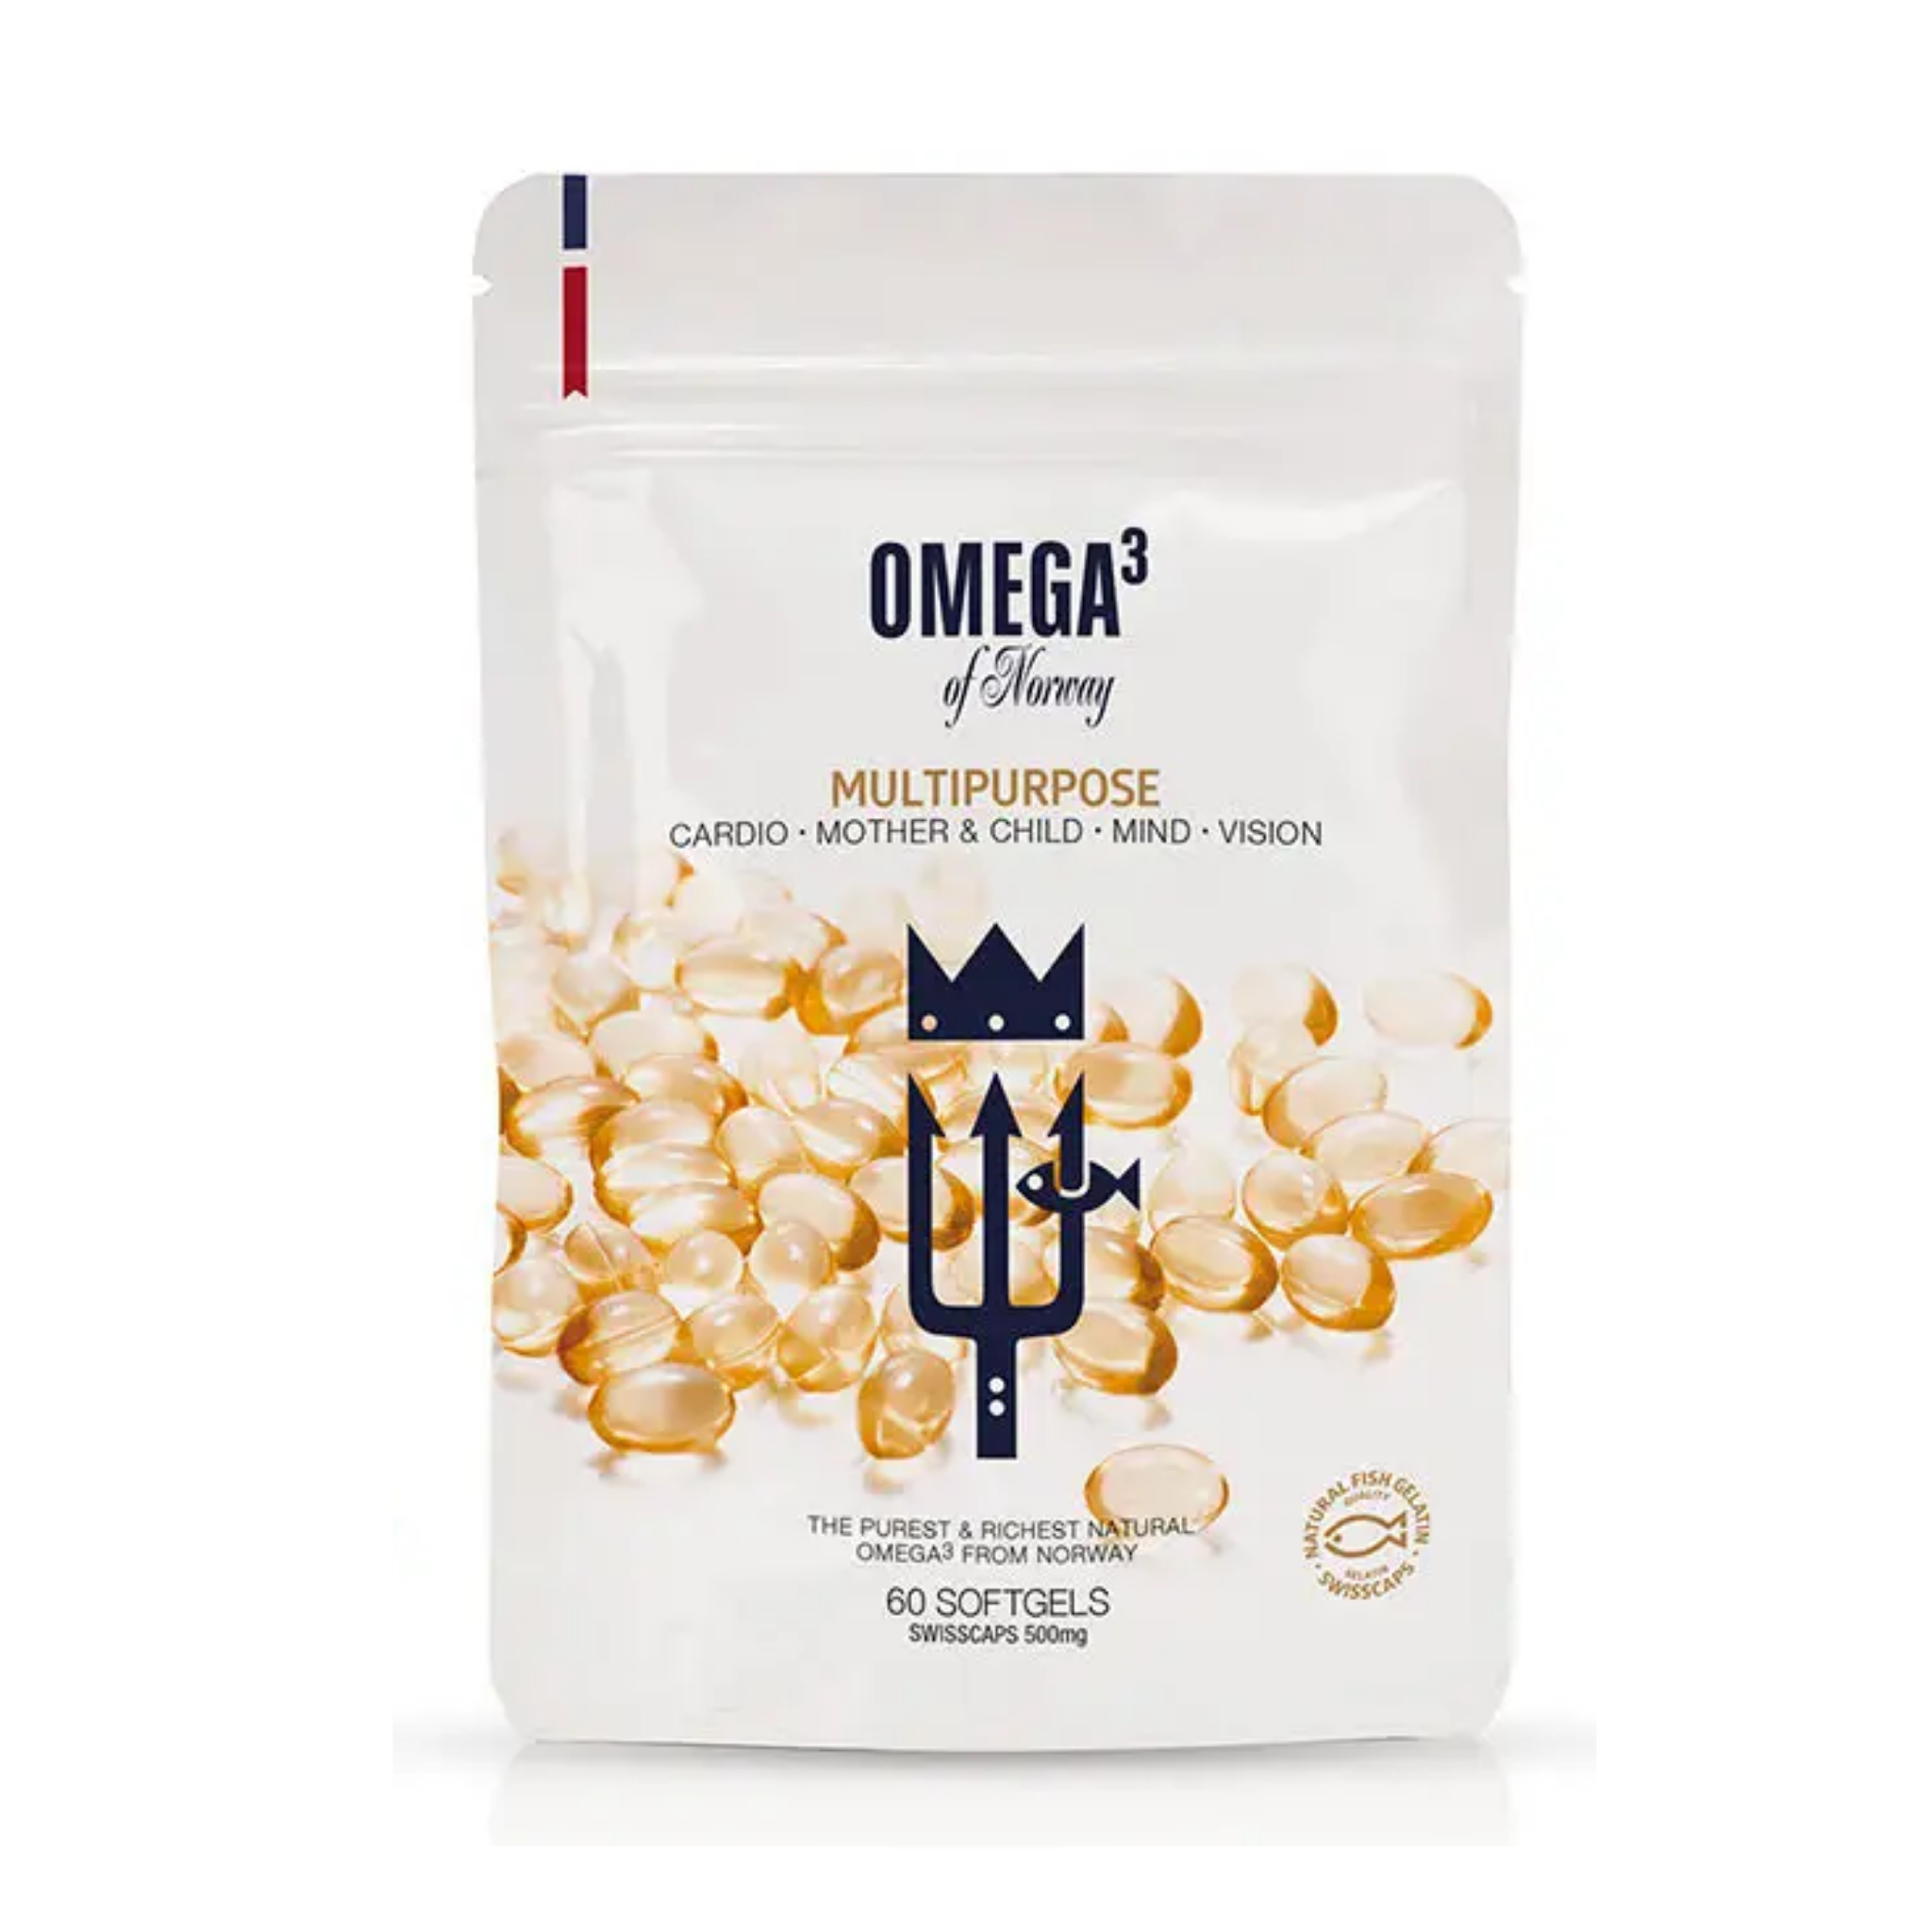 Omega3 of Norway - Vitamin Supplement Travel Pouch